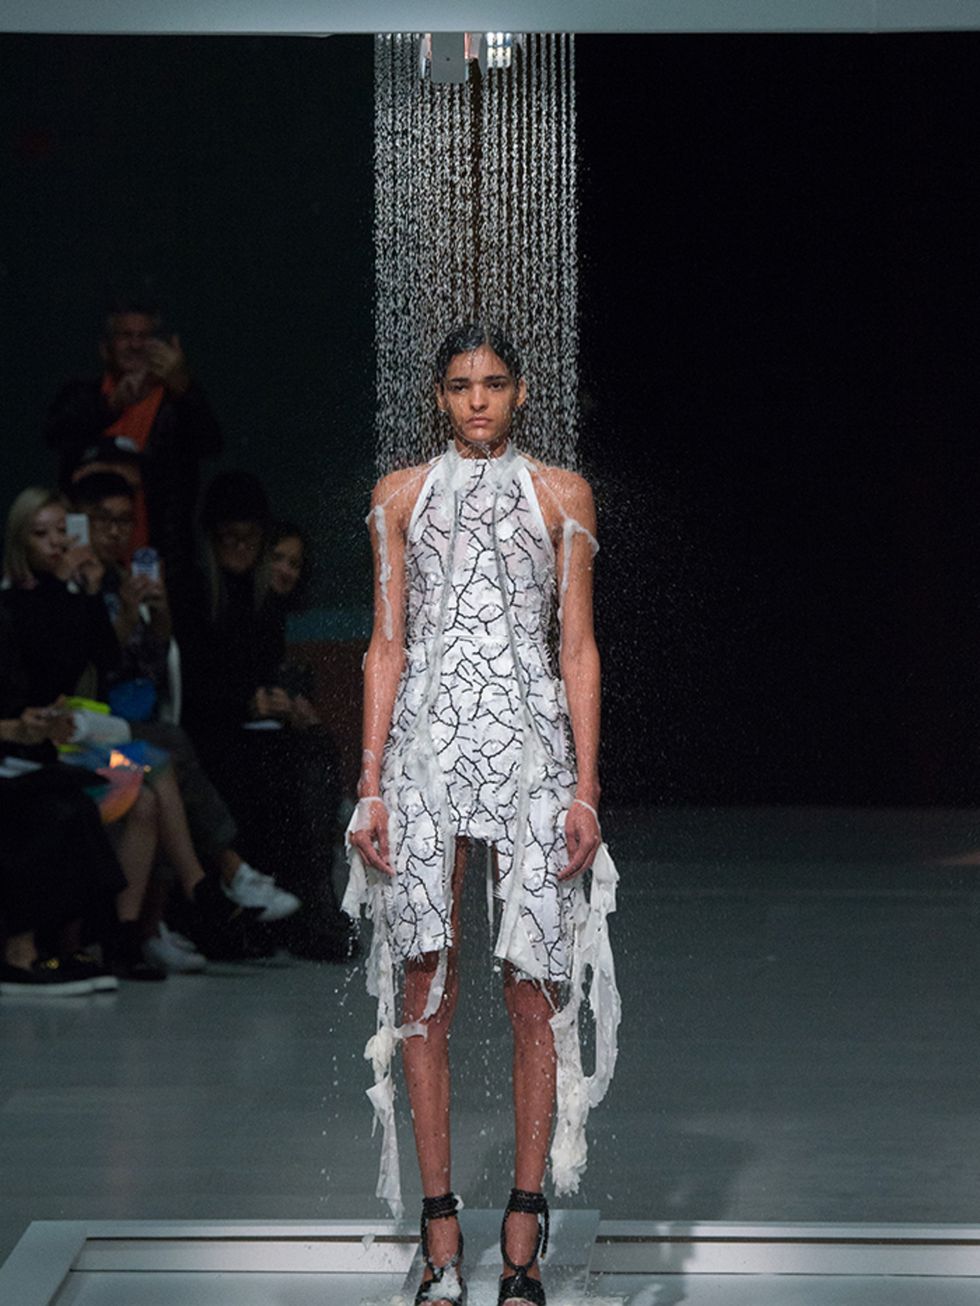 <p>Paper dress + power shower = insta sensation. That's one way to celebrate the Hussein Chalayan's 21st year.</p>